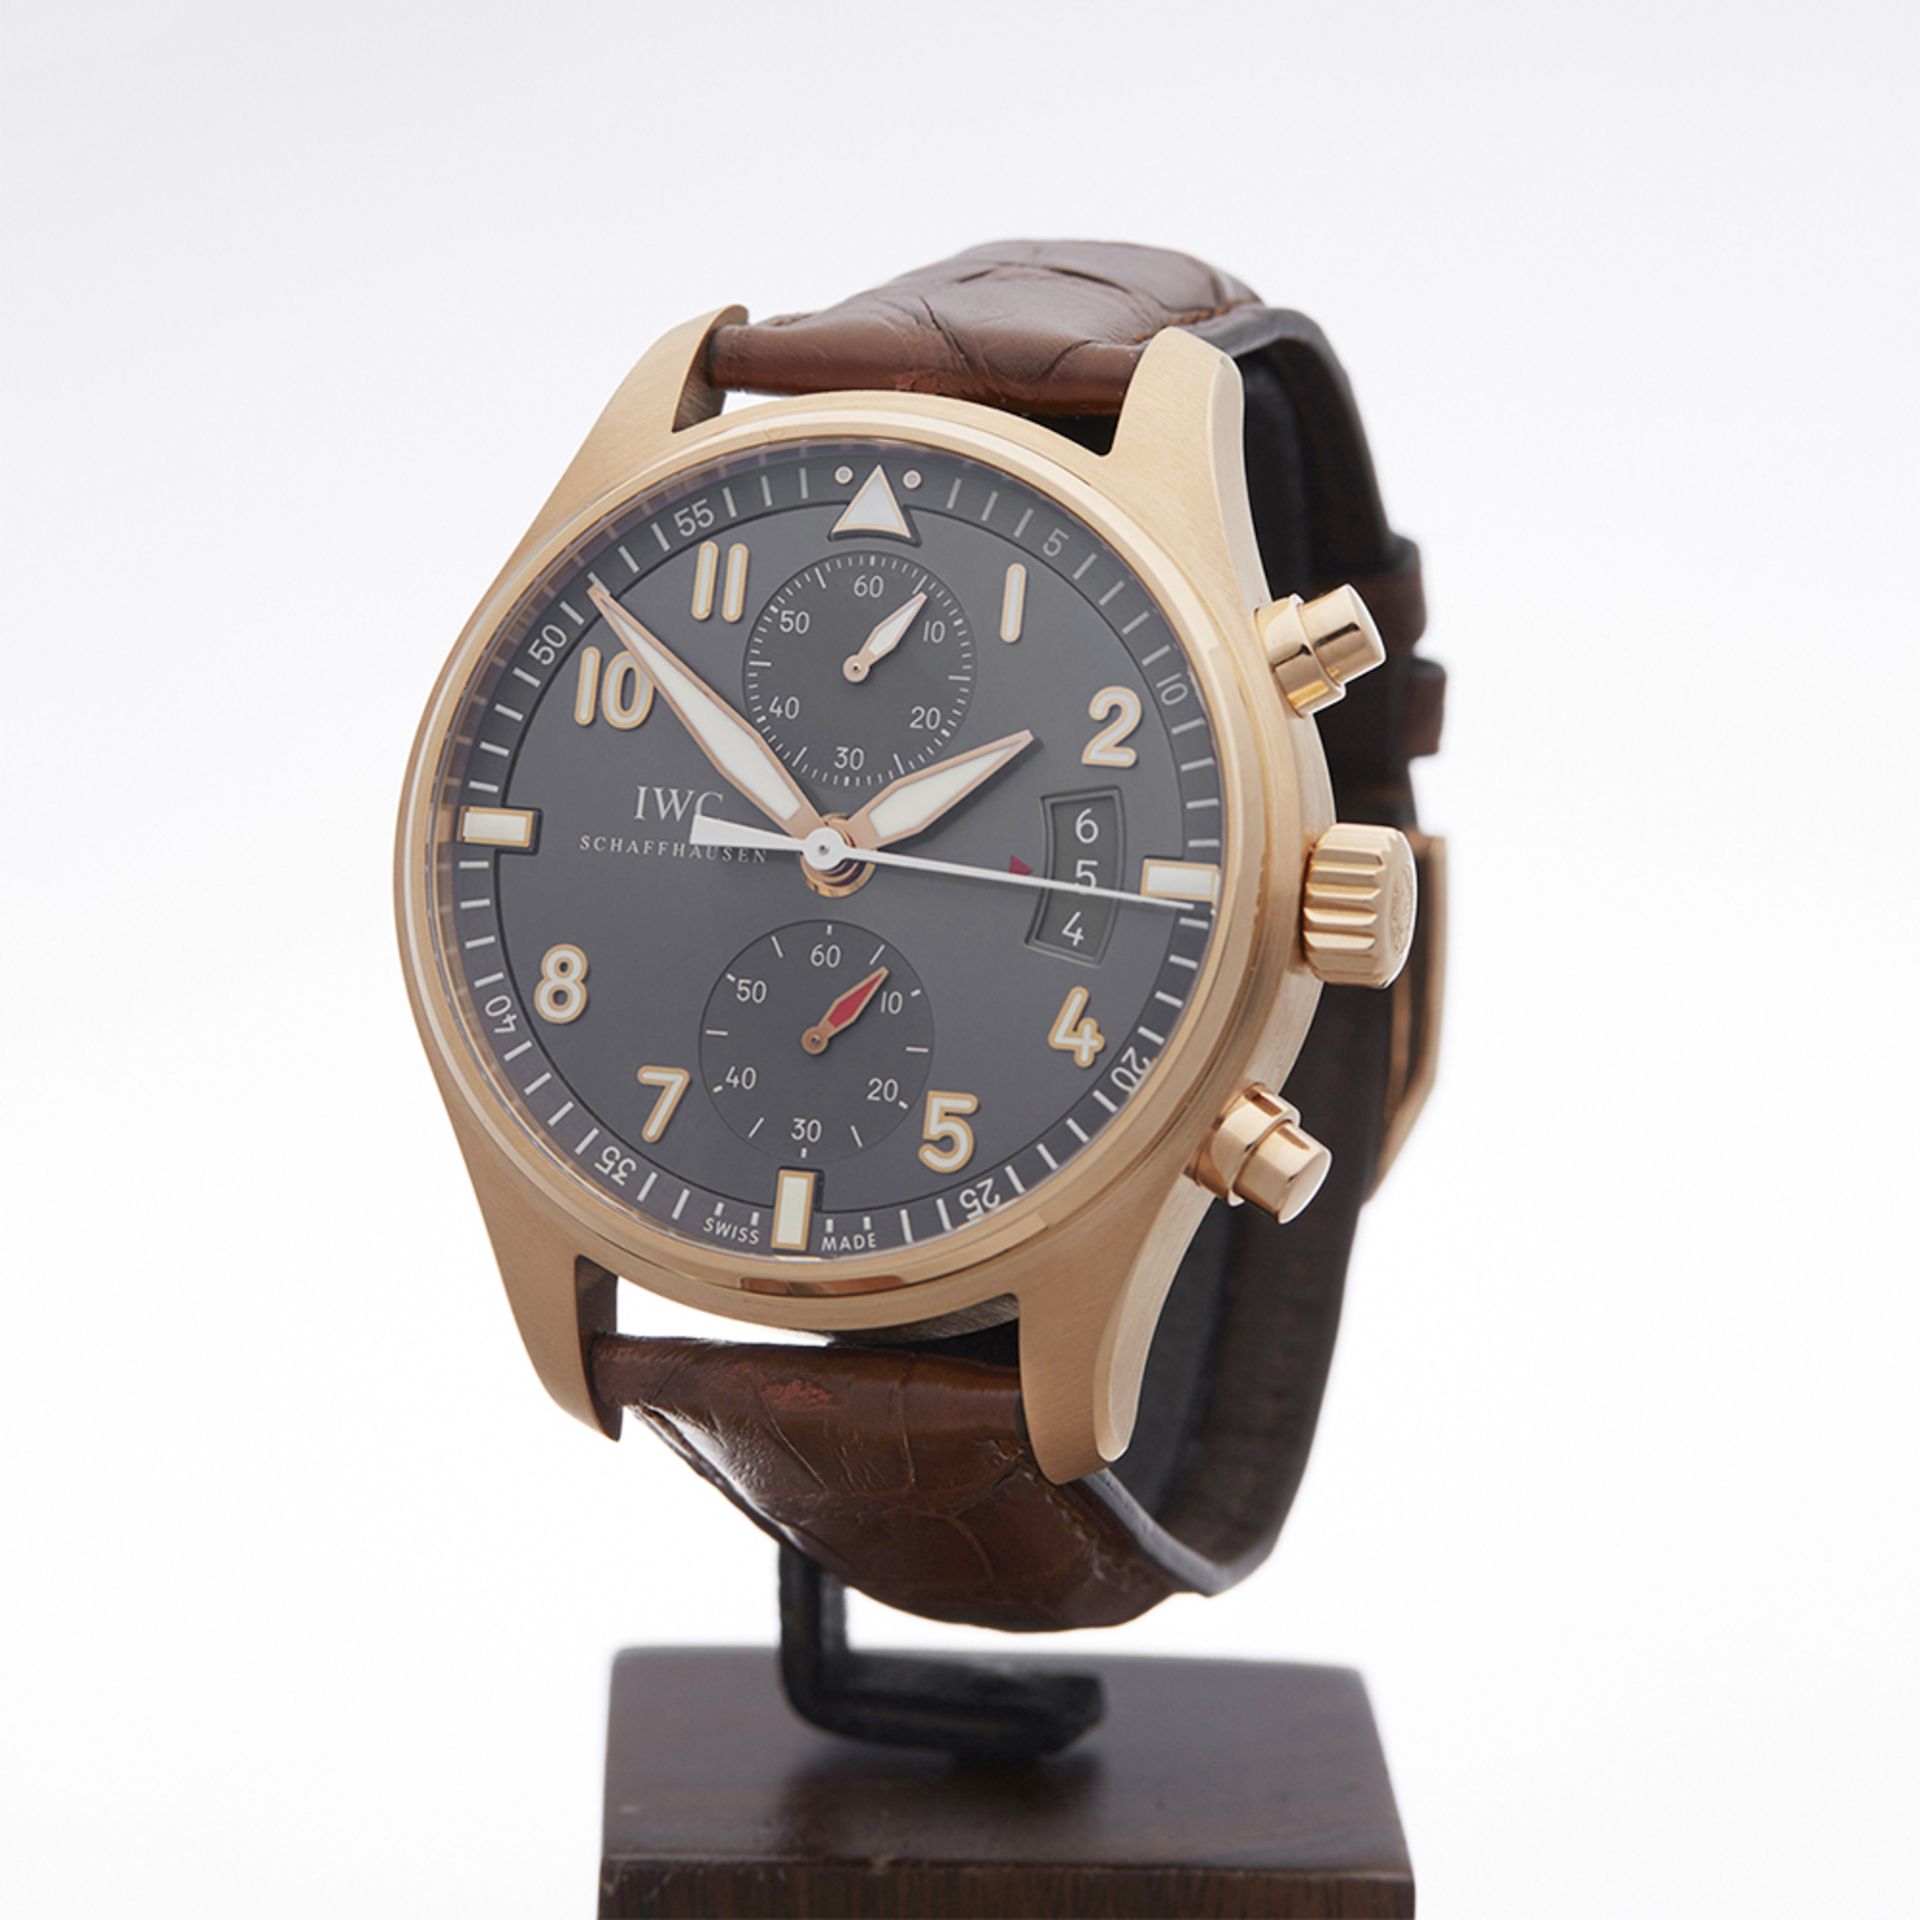 IWC Pilot's Chronograph Spitfire Chronograph 43mm 18k Rose Gold - IW387803 - Image 3 of 9